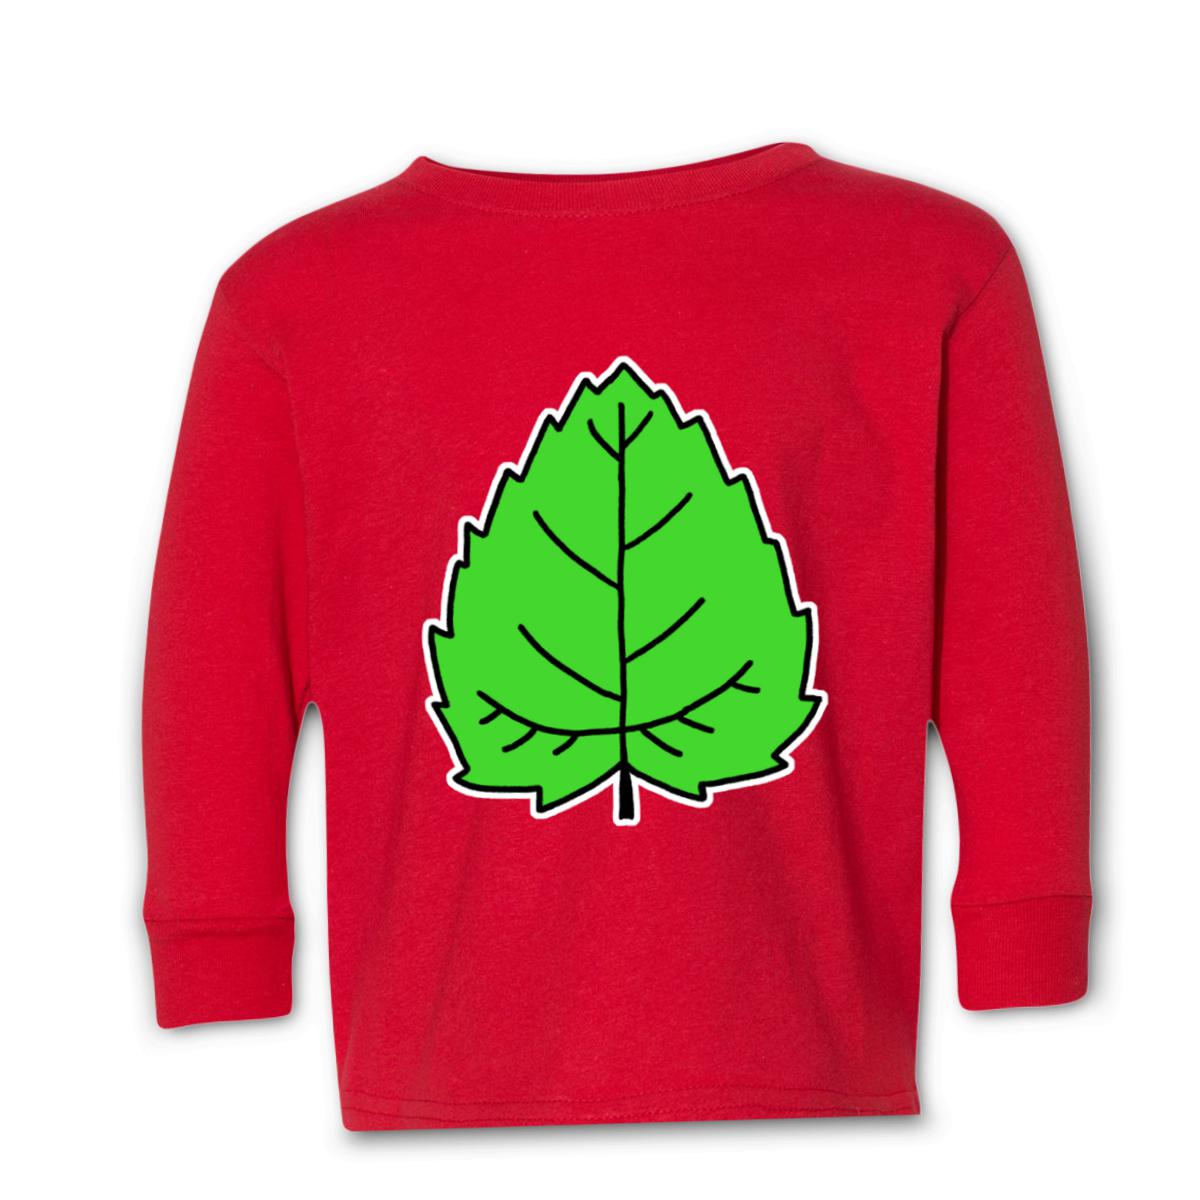 Mulberry Leaf Kid's Long Sleeve Tee Small red